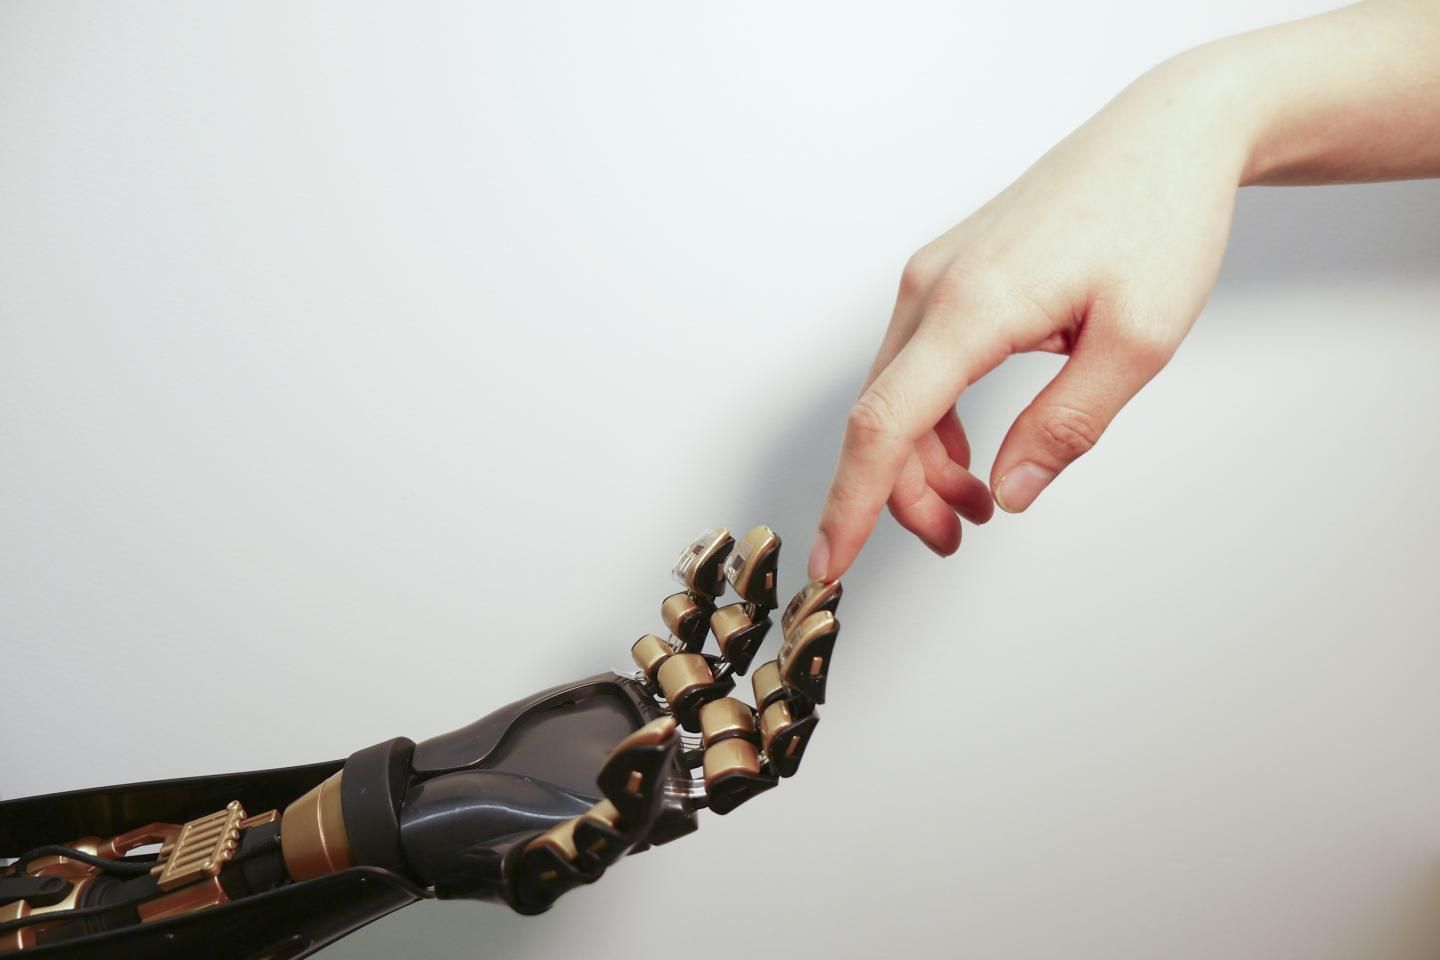 Artificial skin could give prosthetics .cbsnews.com